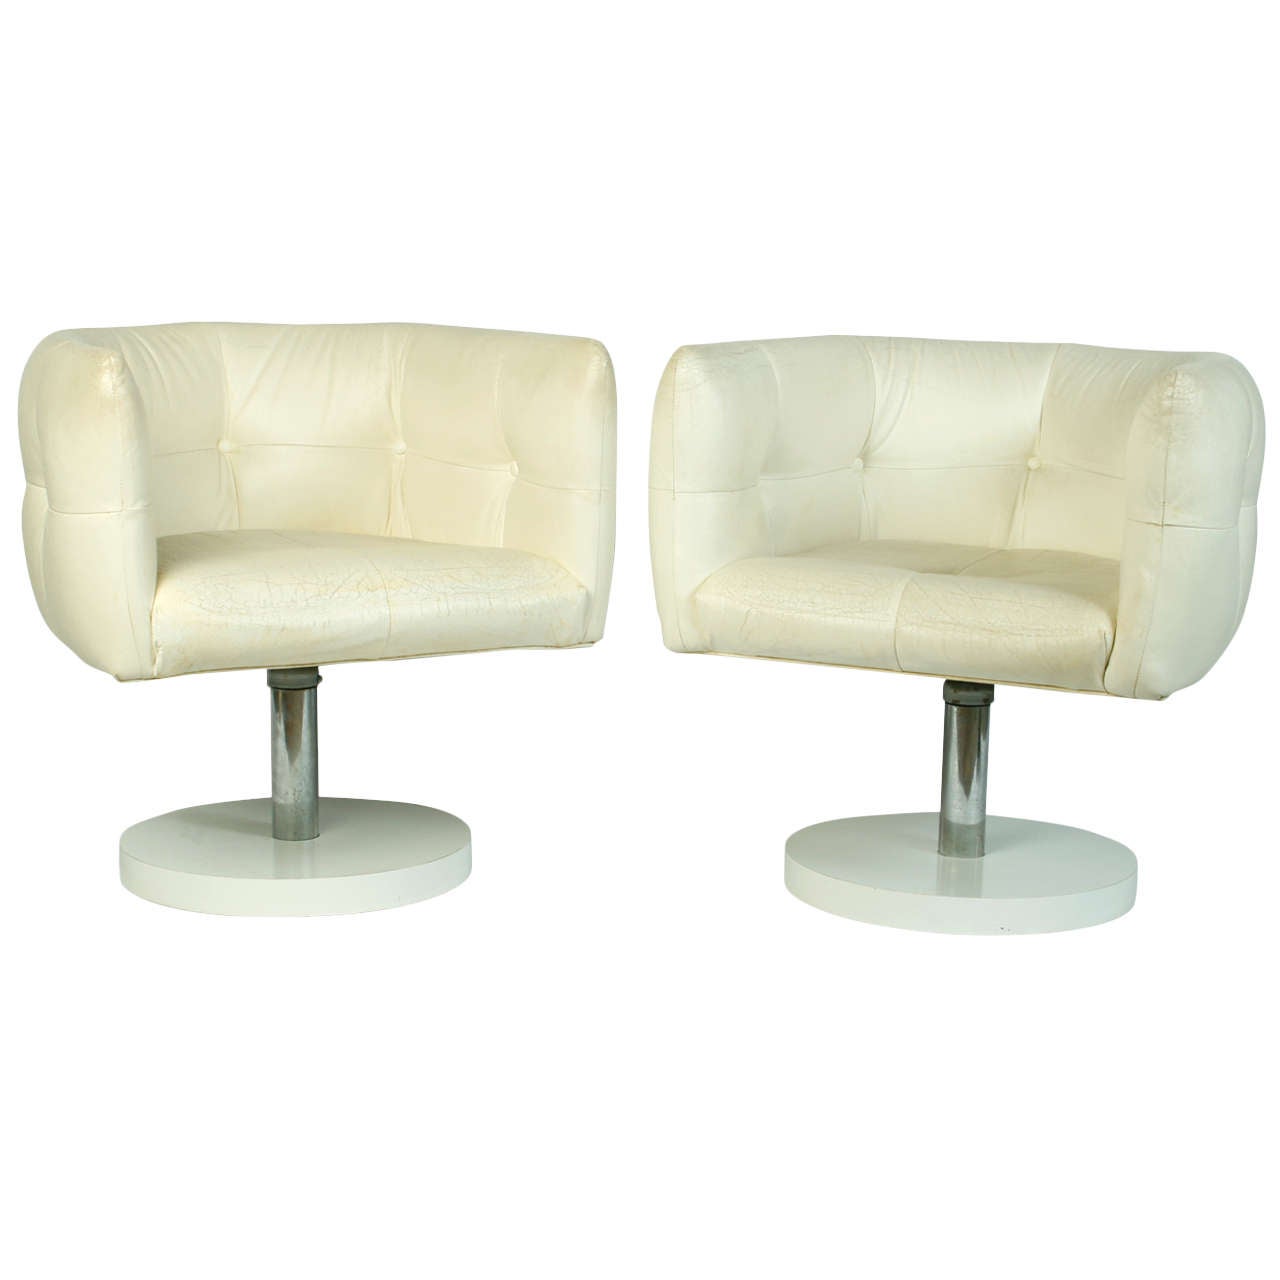 Pair of Milo Baughman Swivel Lounge Chairs For Sale